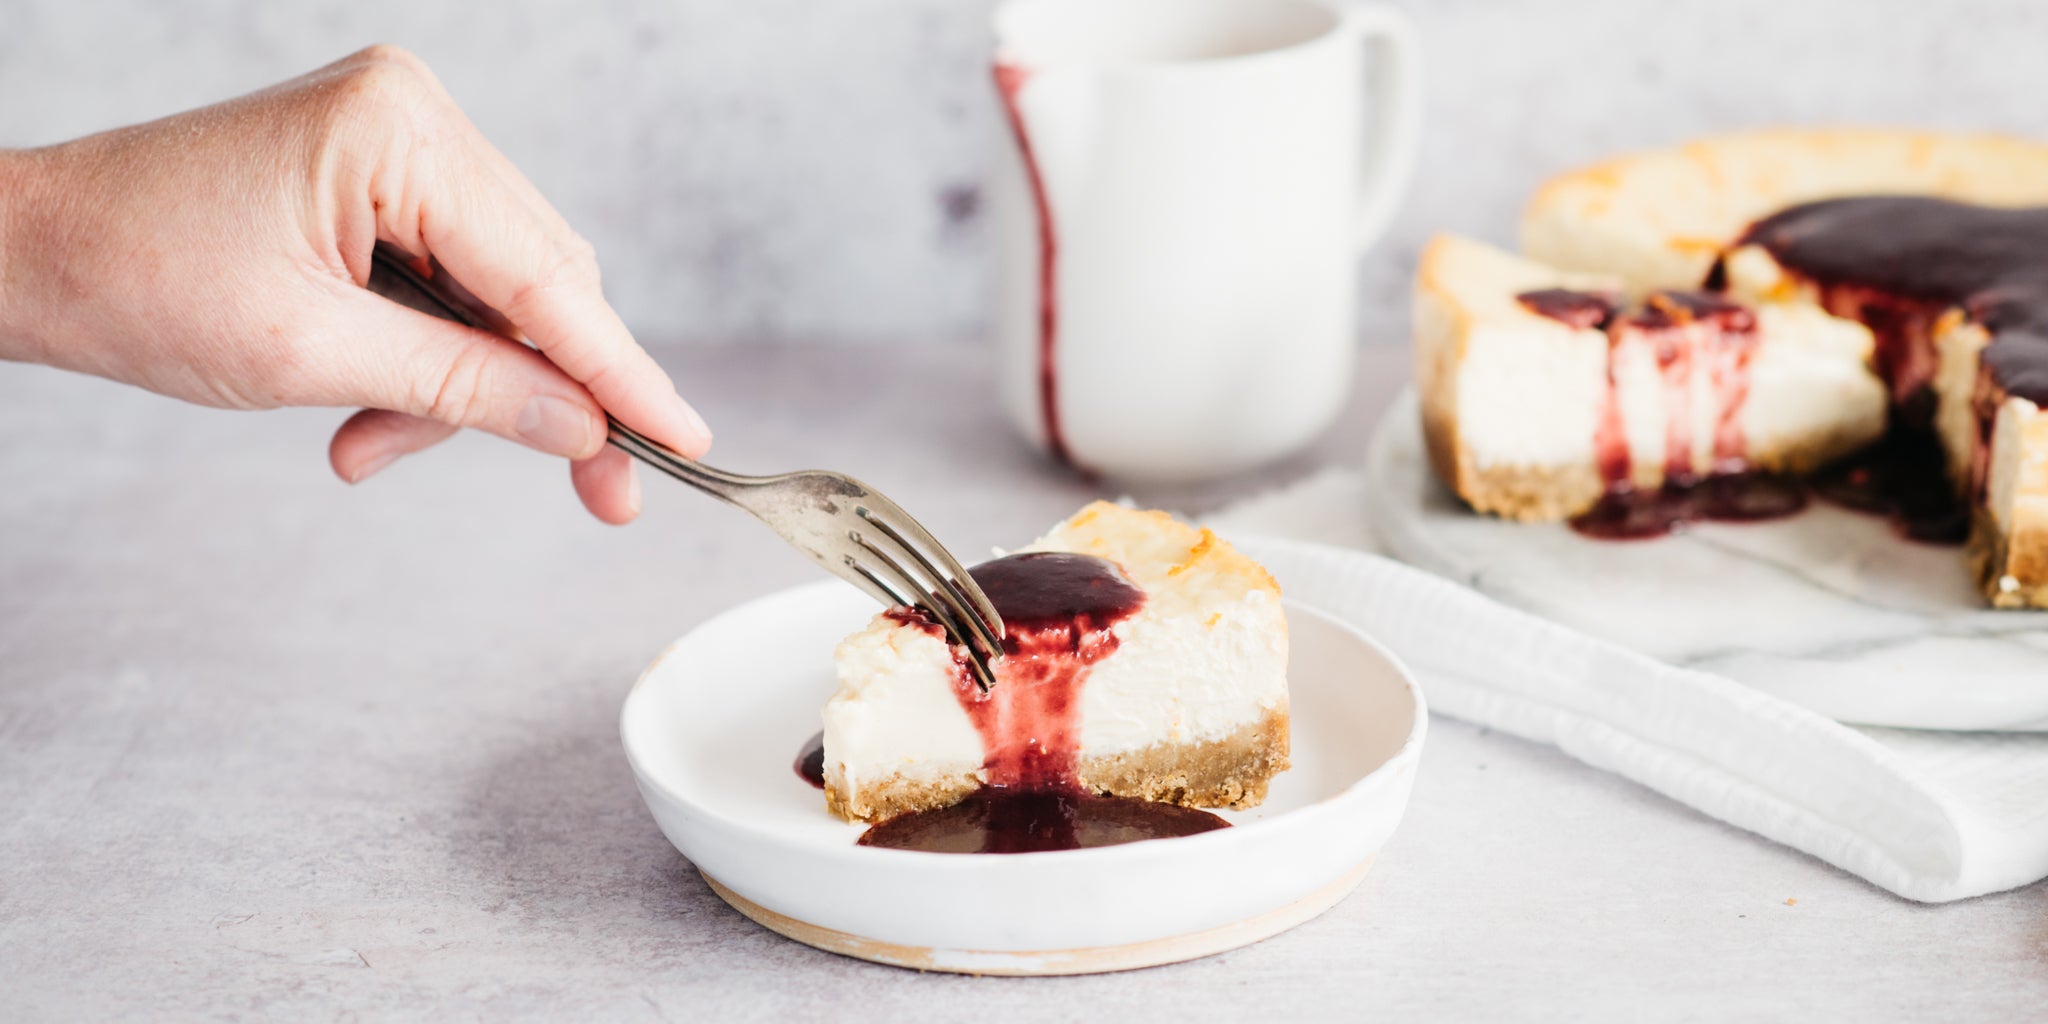 A hand holding a fork slicing into a piece of baked cheesecake covered in raspberry sauce